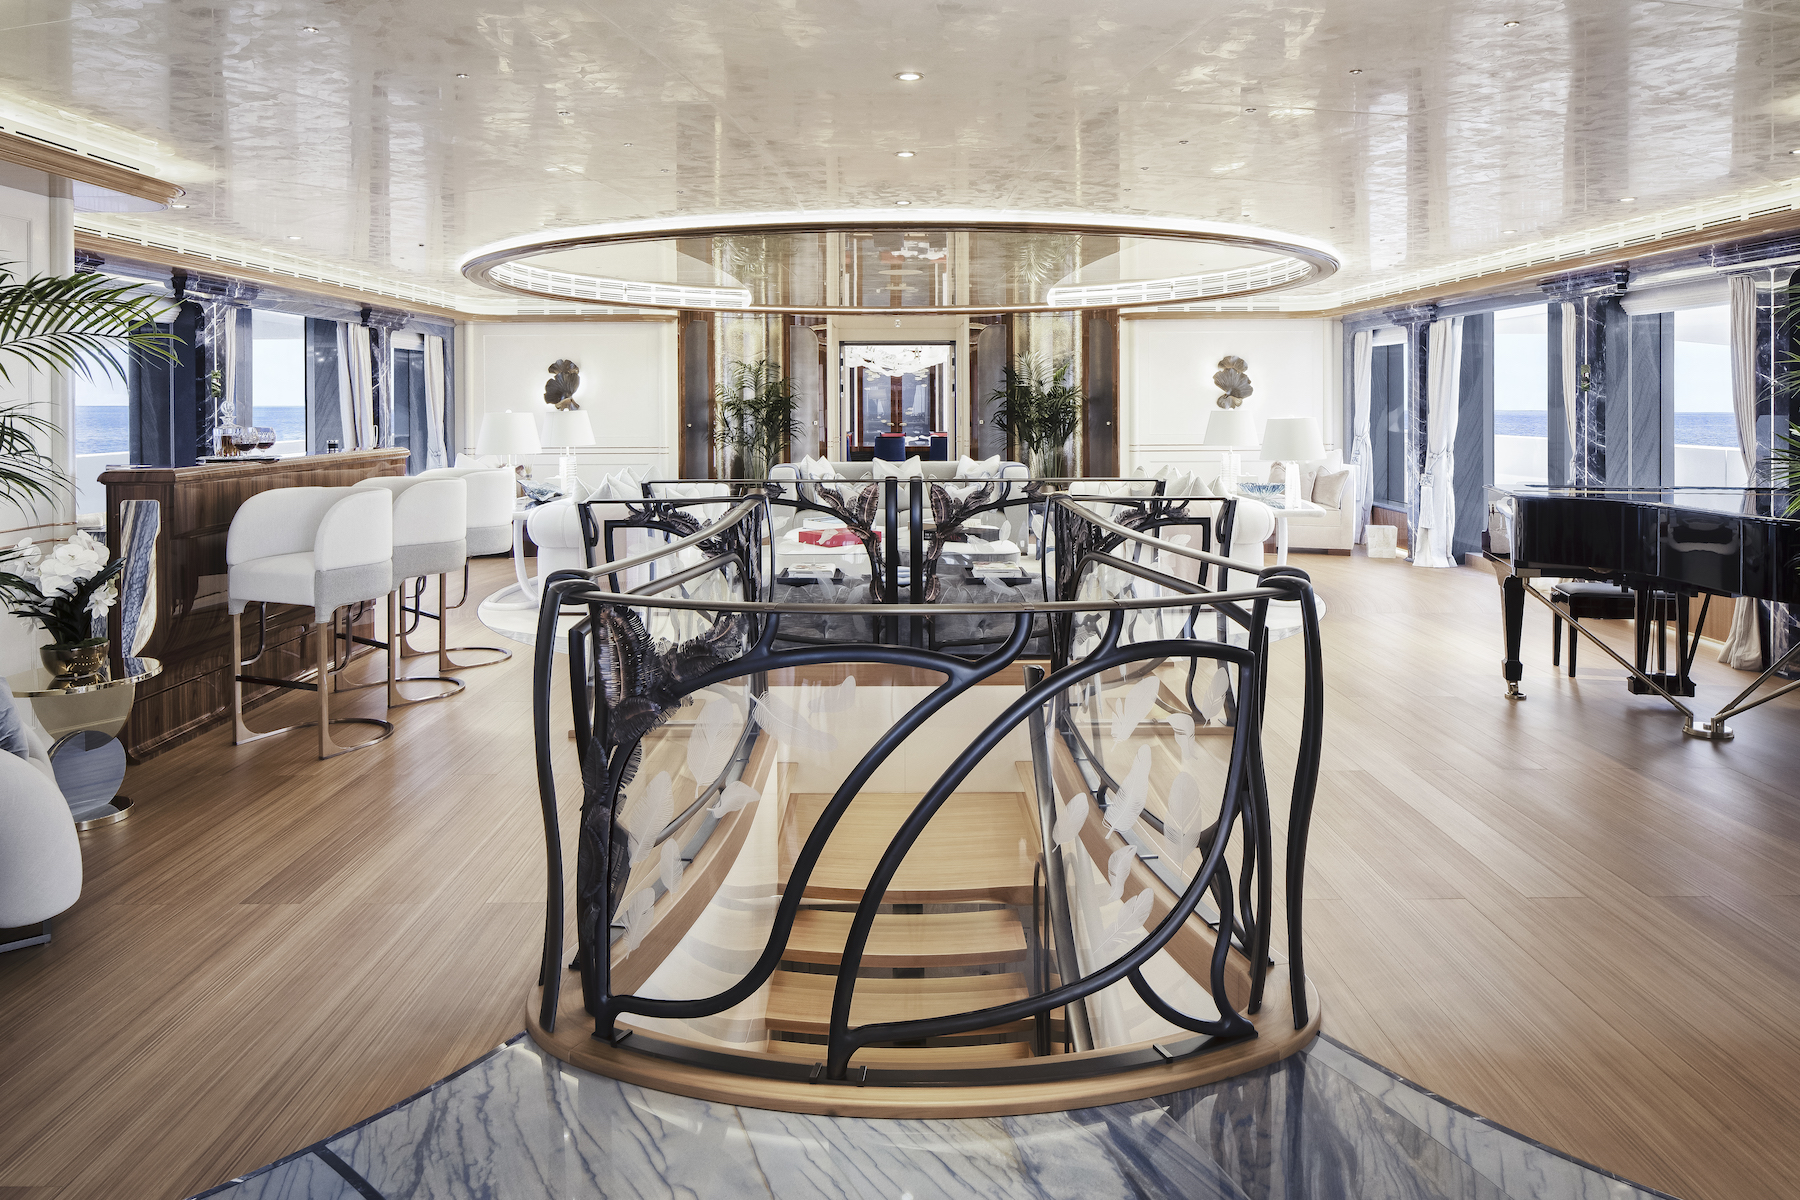 Grand staircase on Ahpo superyacht at Miami International Boat Show 2023 in Effect Magazine